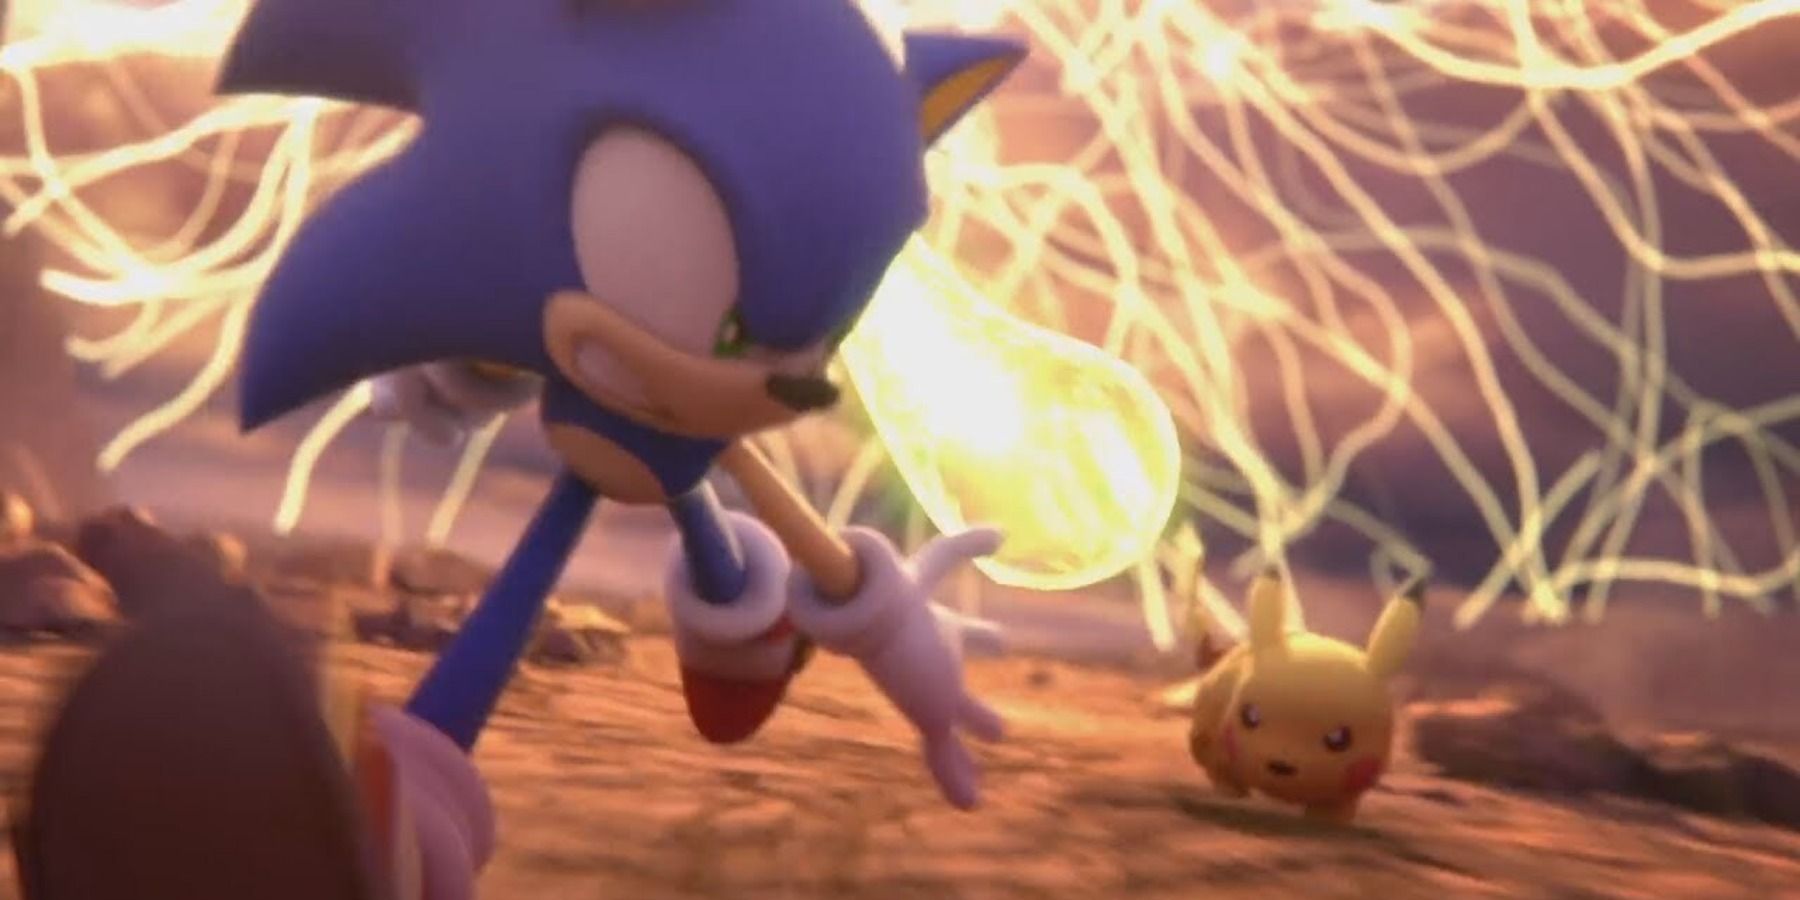 Sonic trying to save Pikachu from a glim attack in the world of light reveals a trailer for Super Smash Bros. Ultimate. Ultimate.